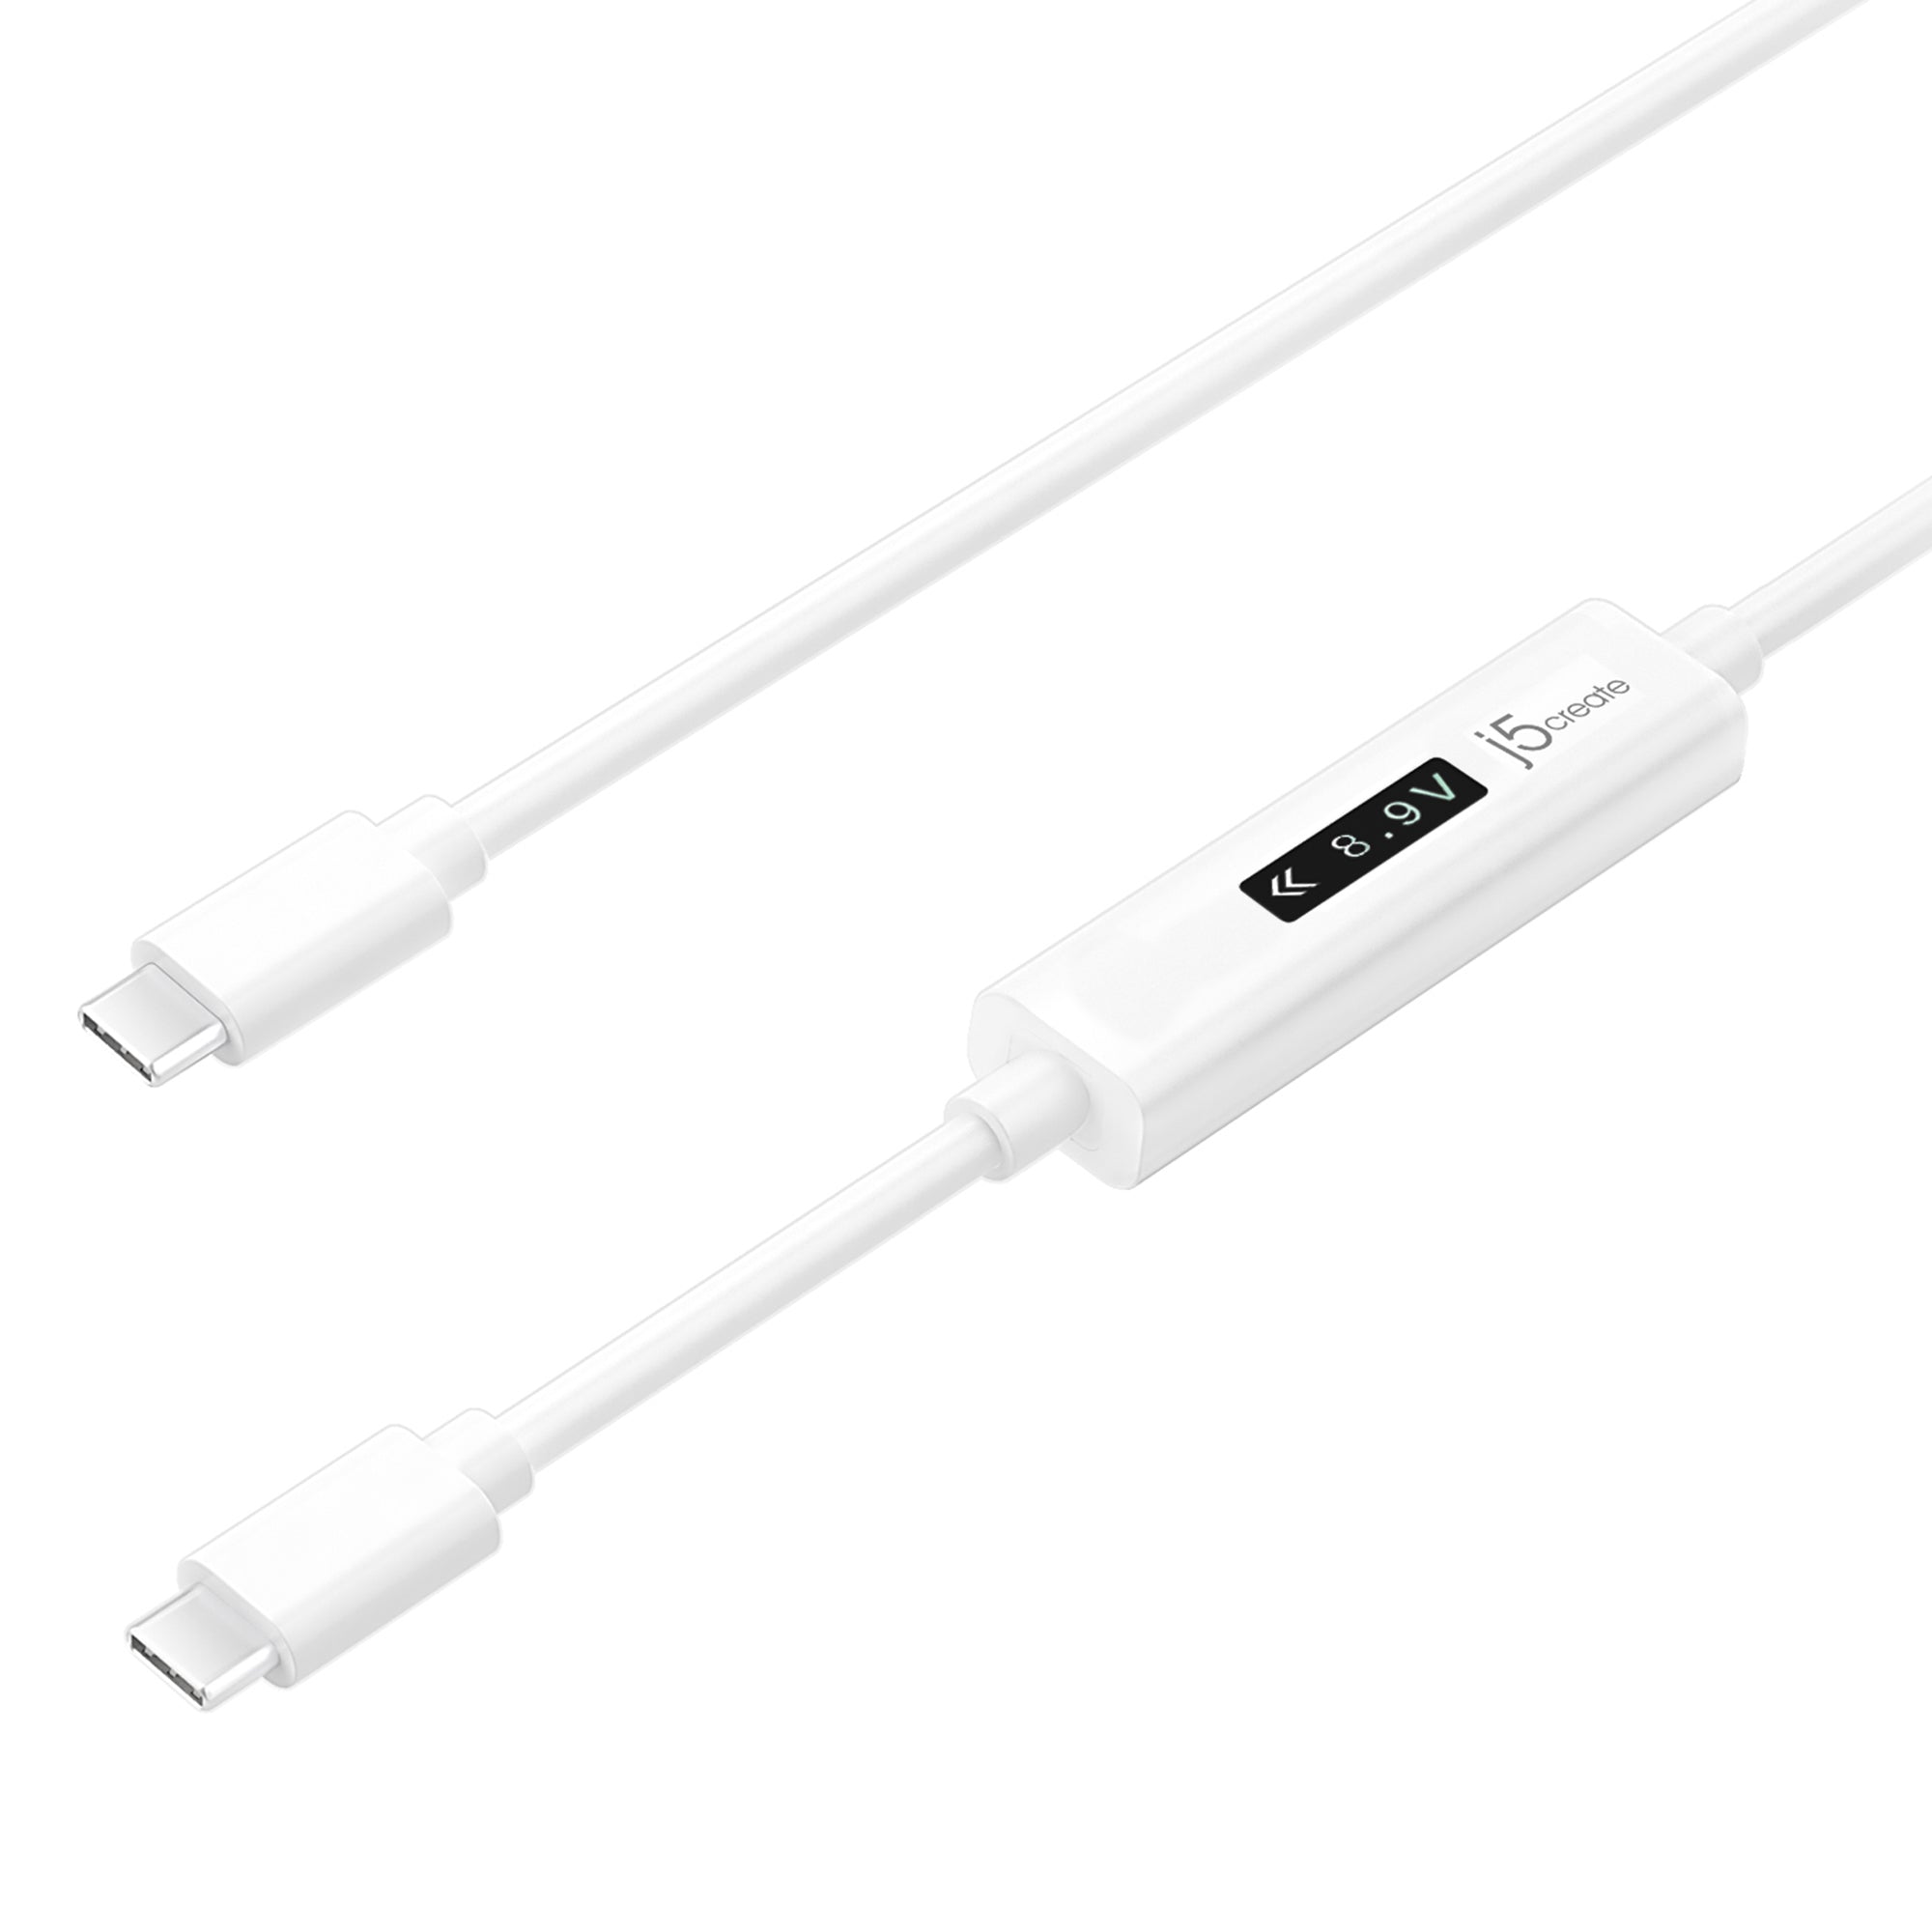 j5create JUCP14 USB-C™ 2.0 to USB-C™ Cable With OLED Dynamic Power Meter, White, 1.2 m